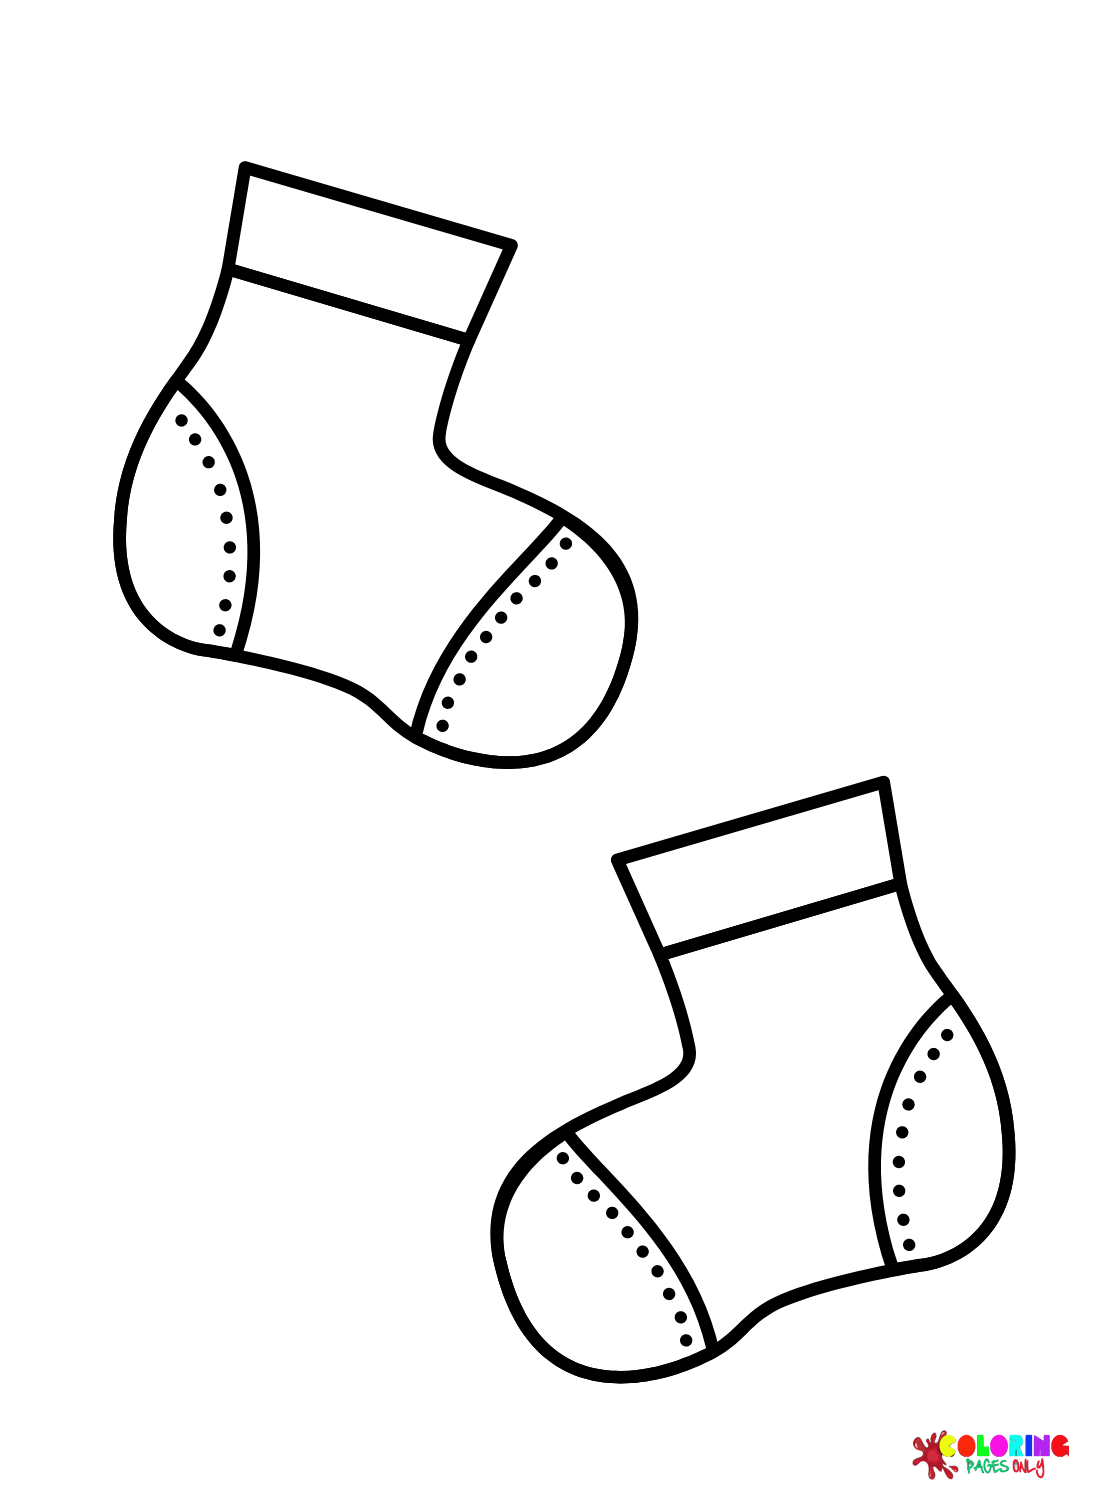 Free Socks Printable Coloring Page - Free Printable Coloring Pages